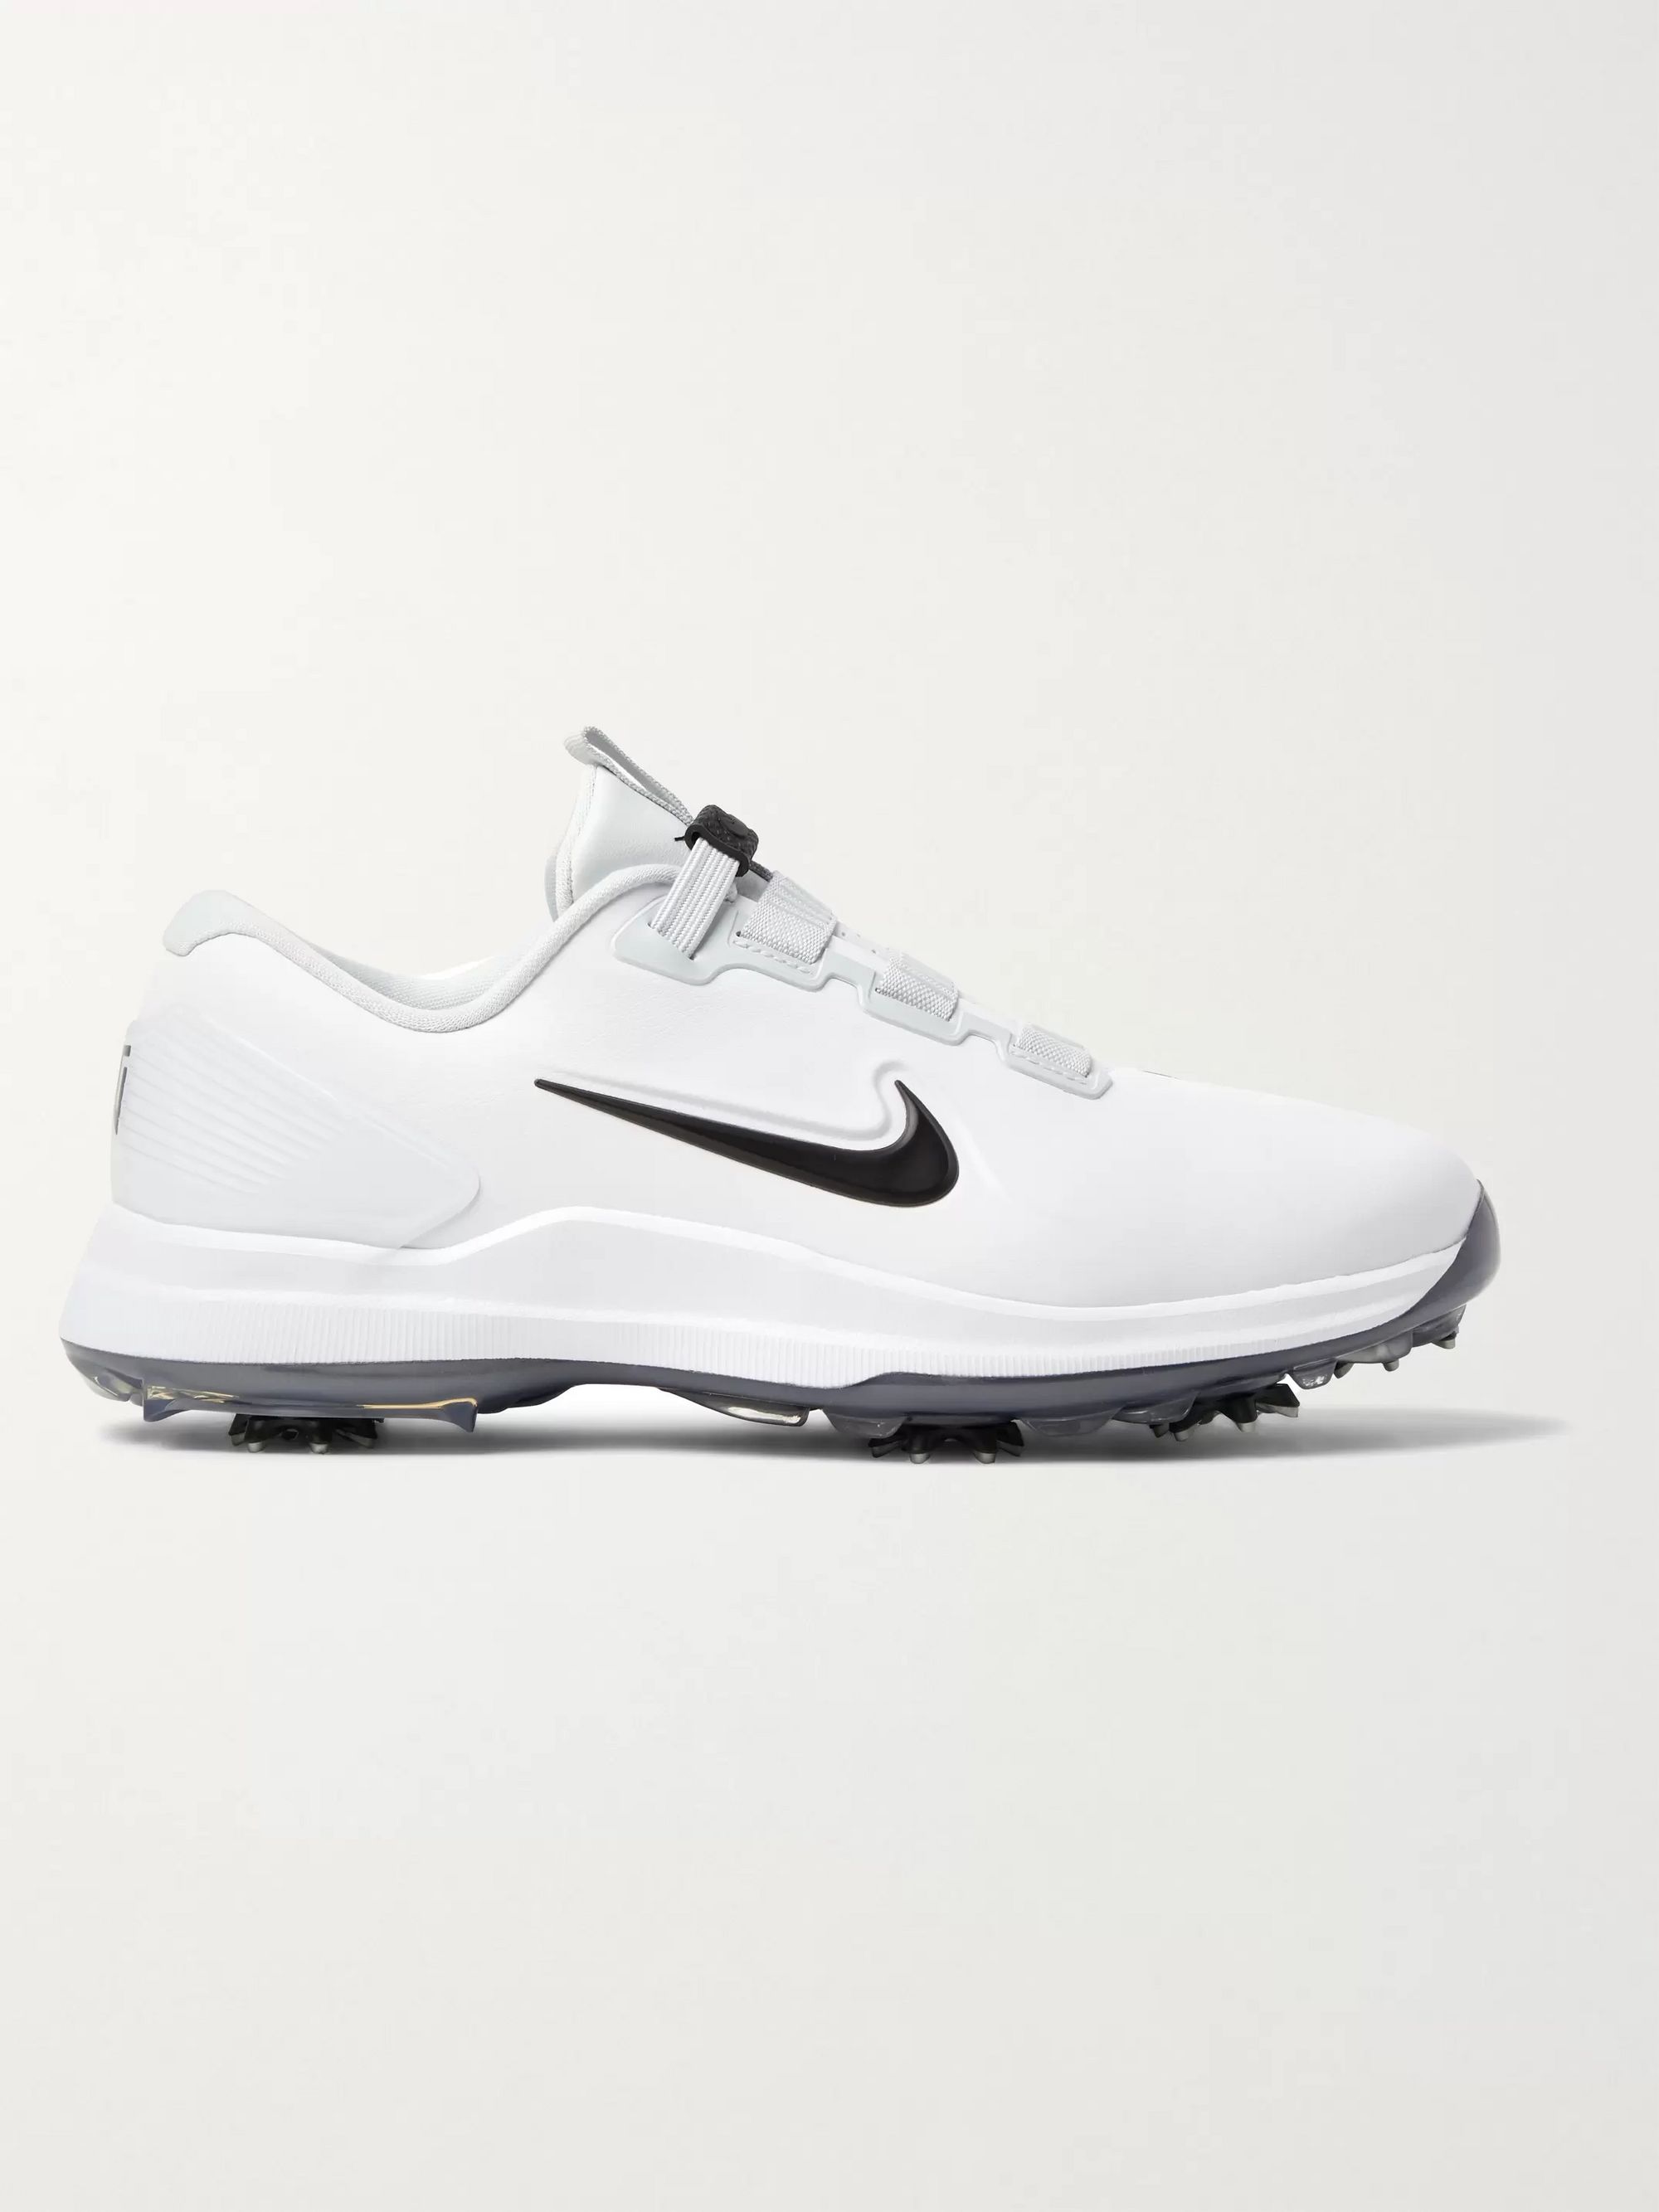 tiger woods masters shoes